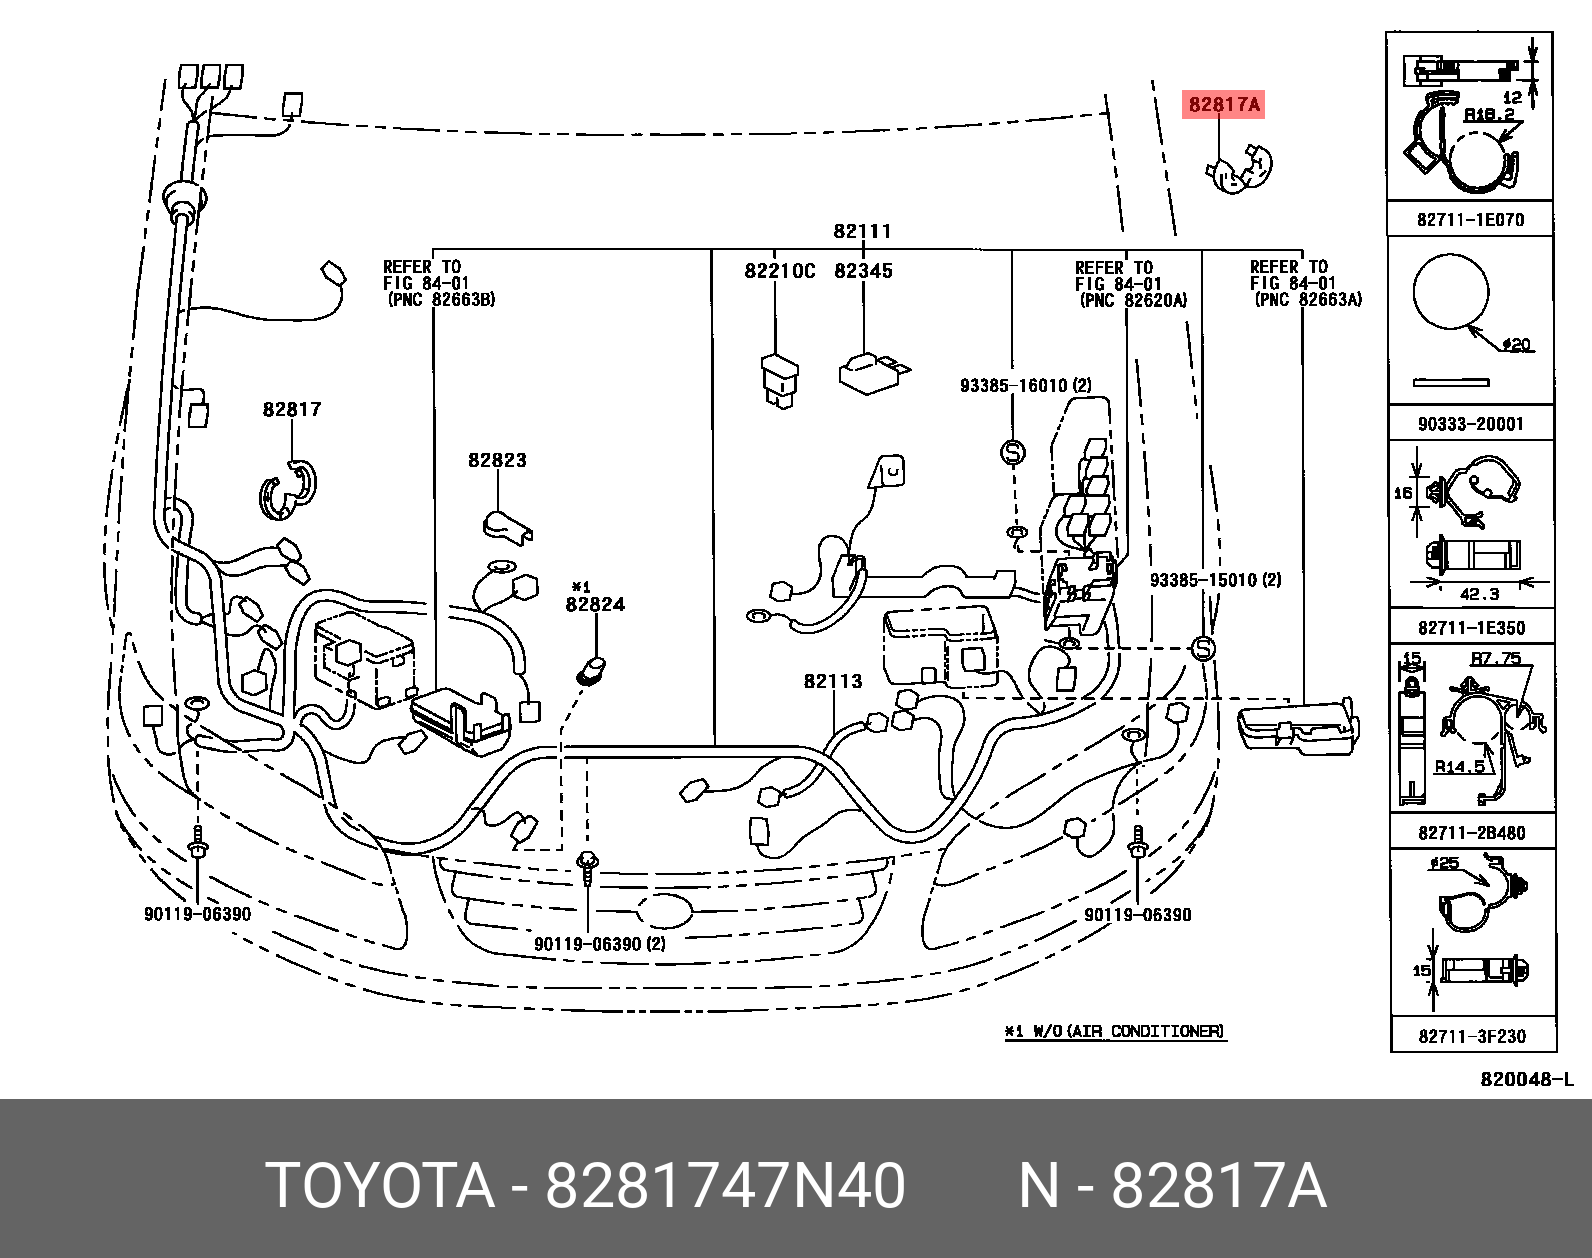 PRIUS 201511 -, PROTECTOR, WIRING HARNESS, NO.2